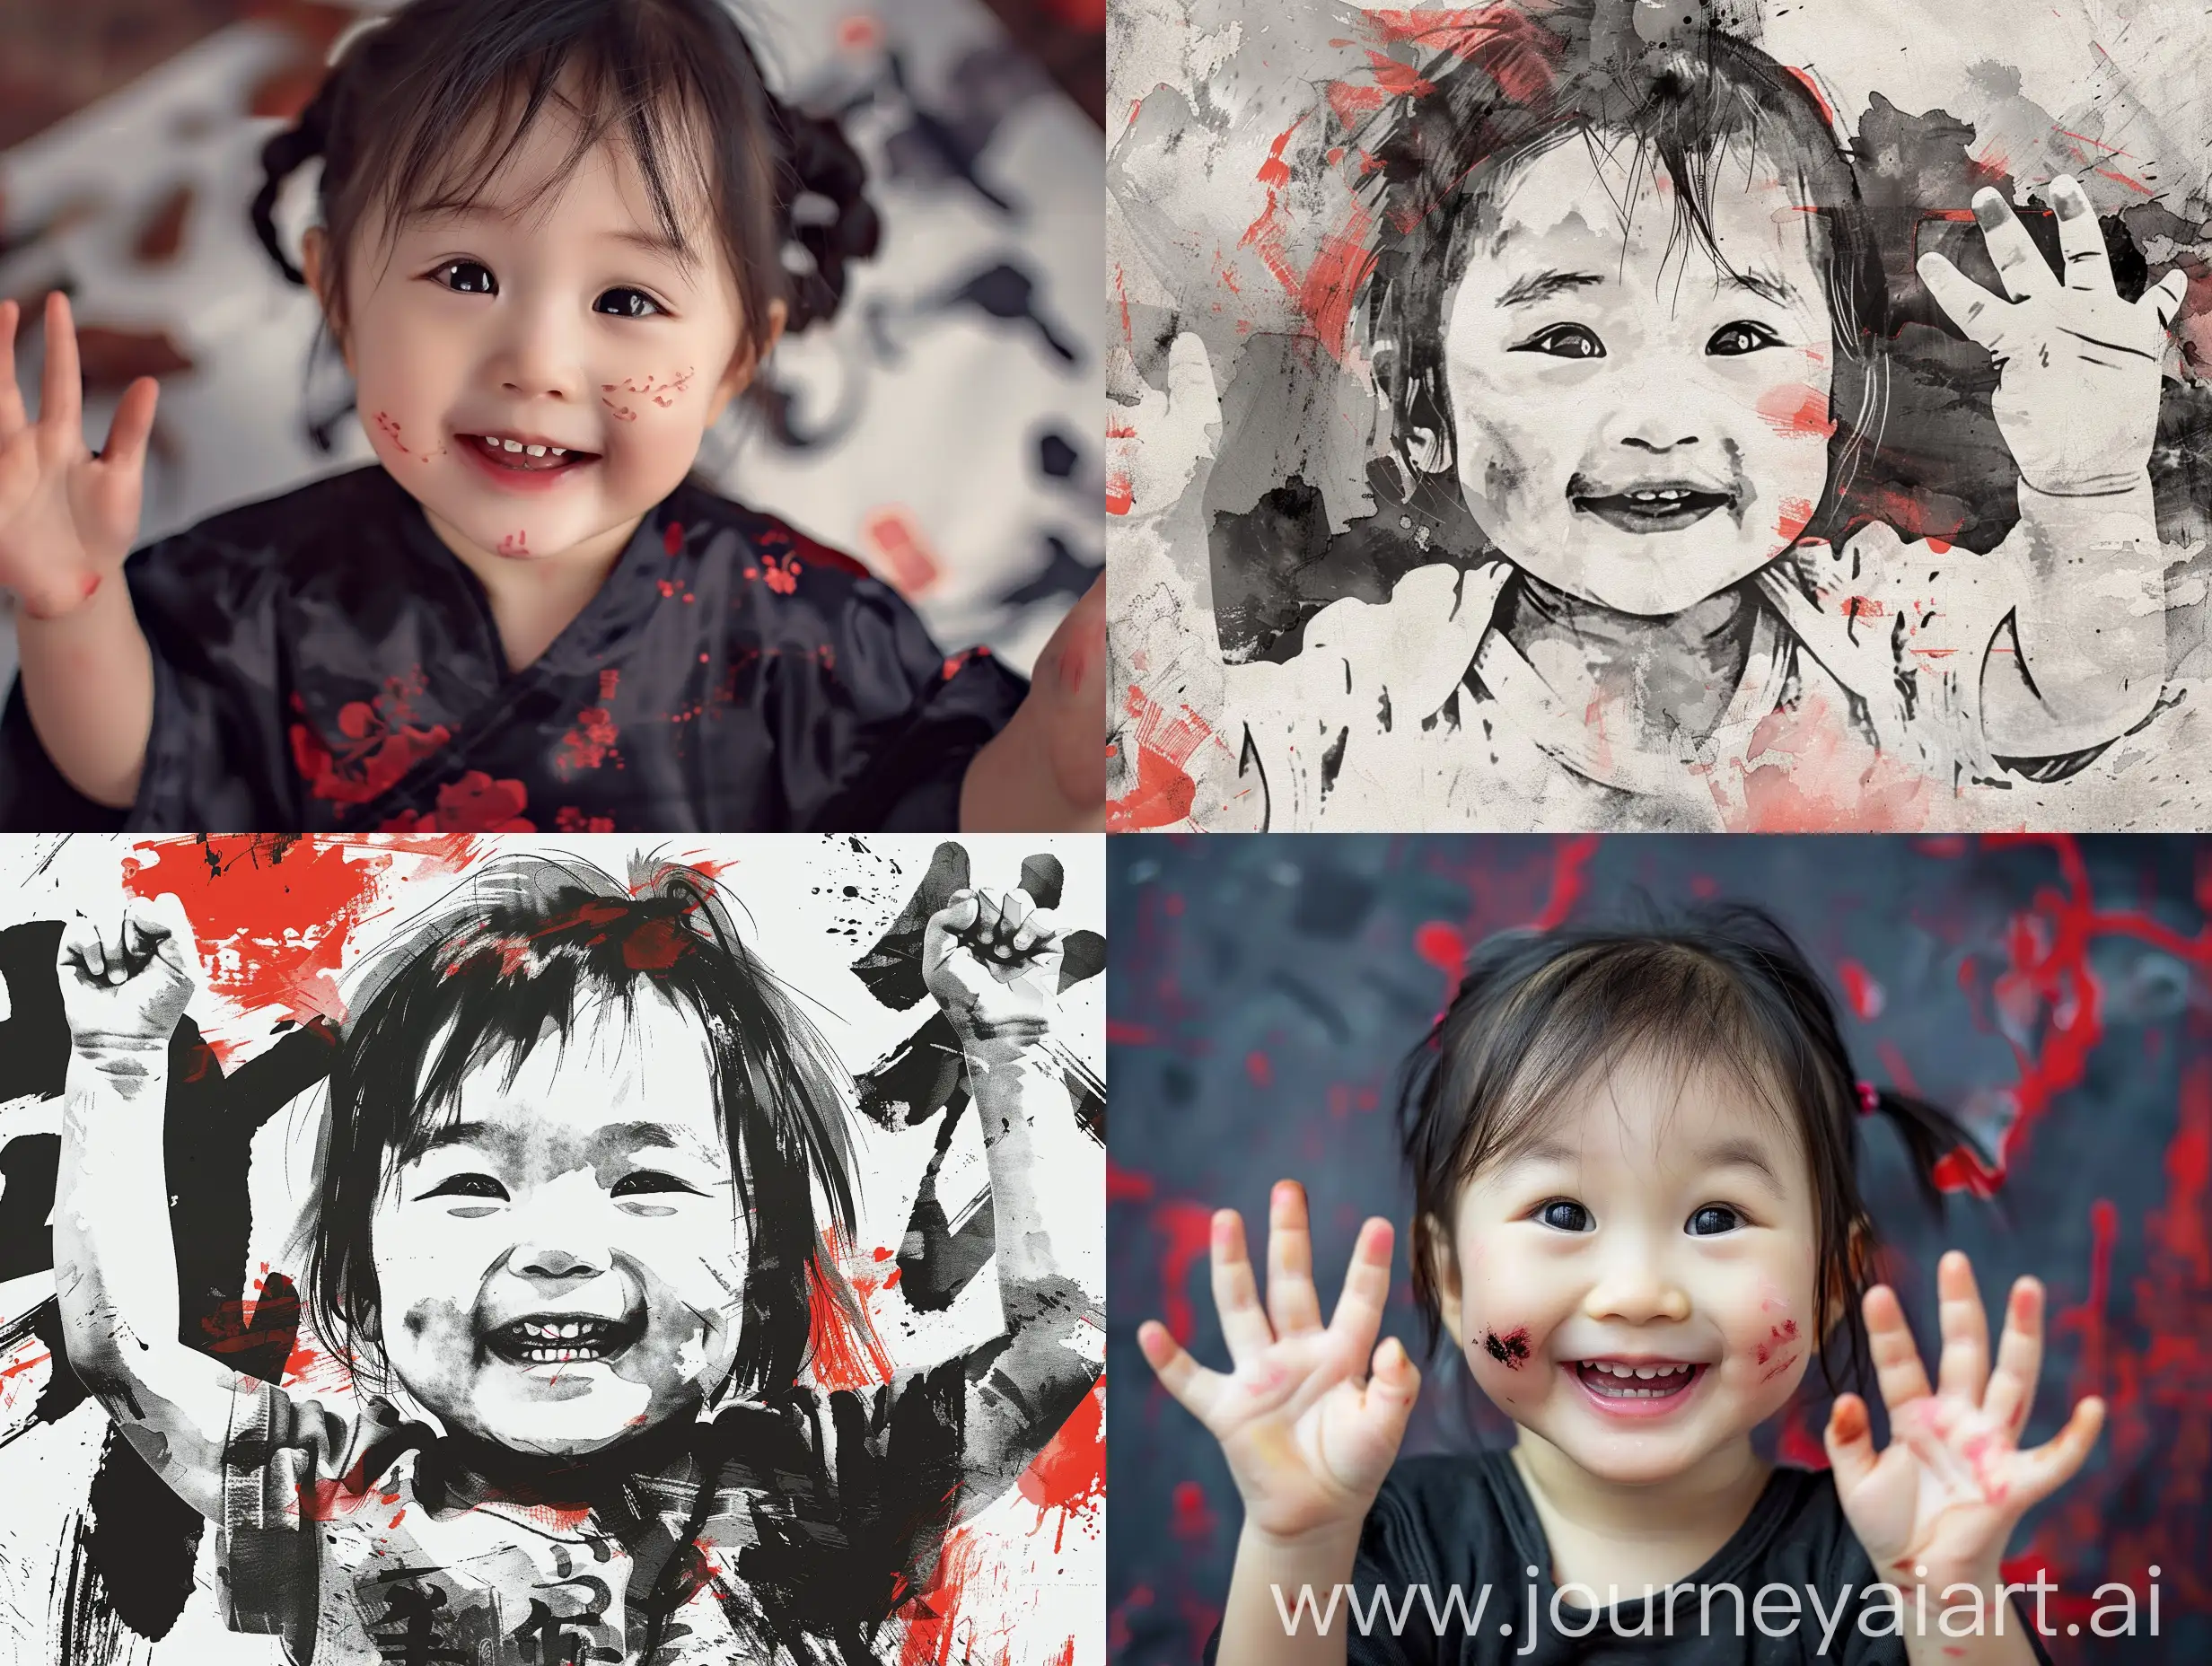 A very cute little Chinese girl, 2 years old, chubby little round face, with a smile on her face, hands in the air, Chinese ink painting style, black and red tones, face close-up